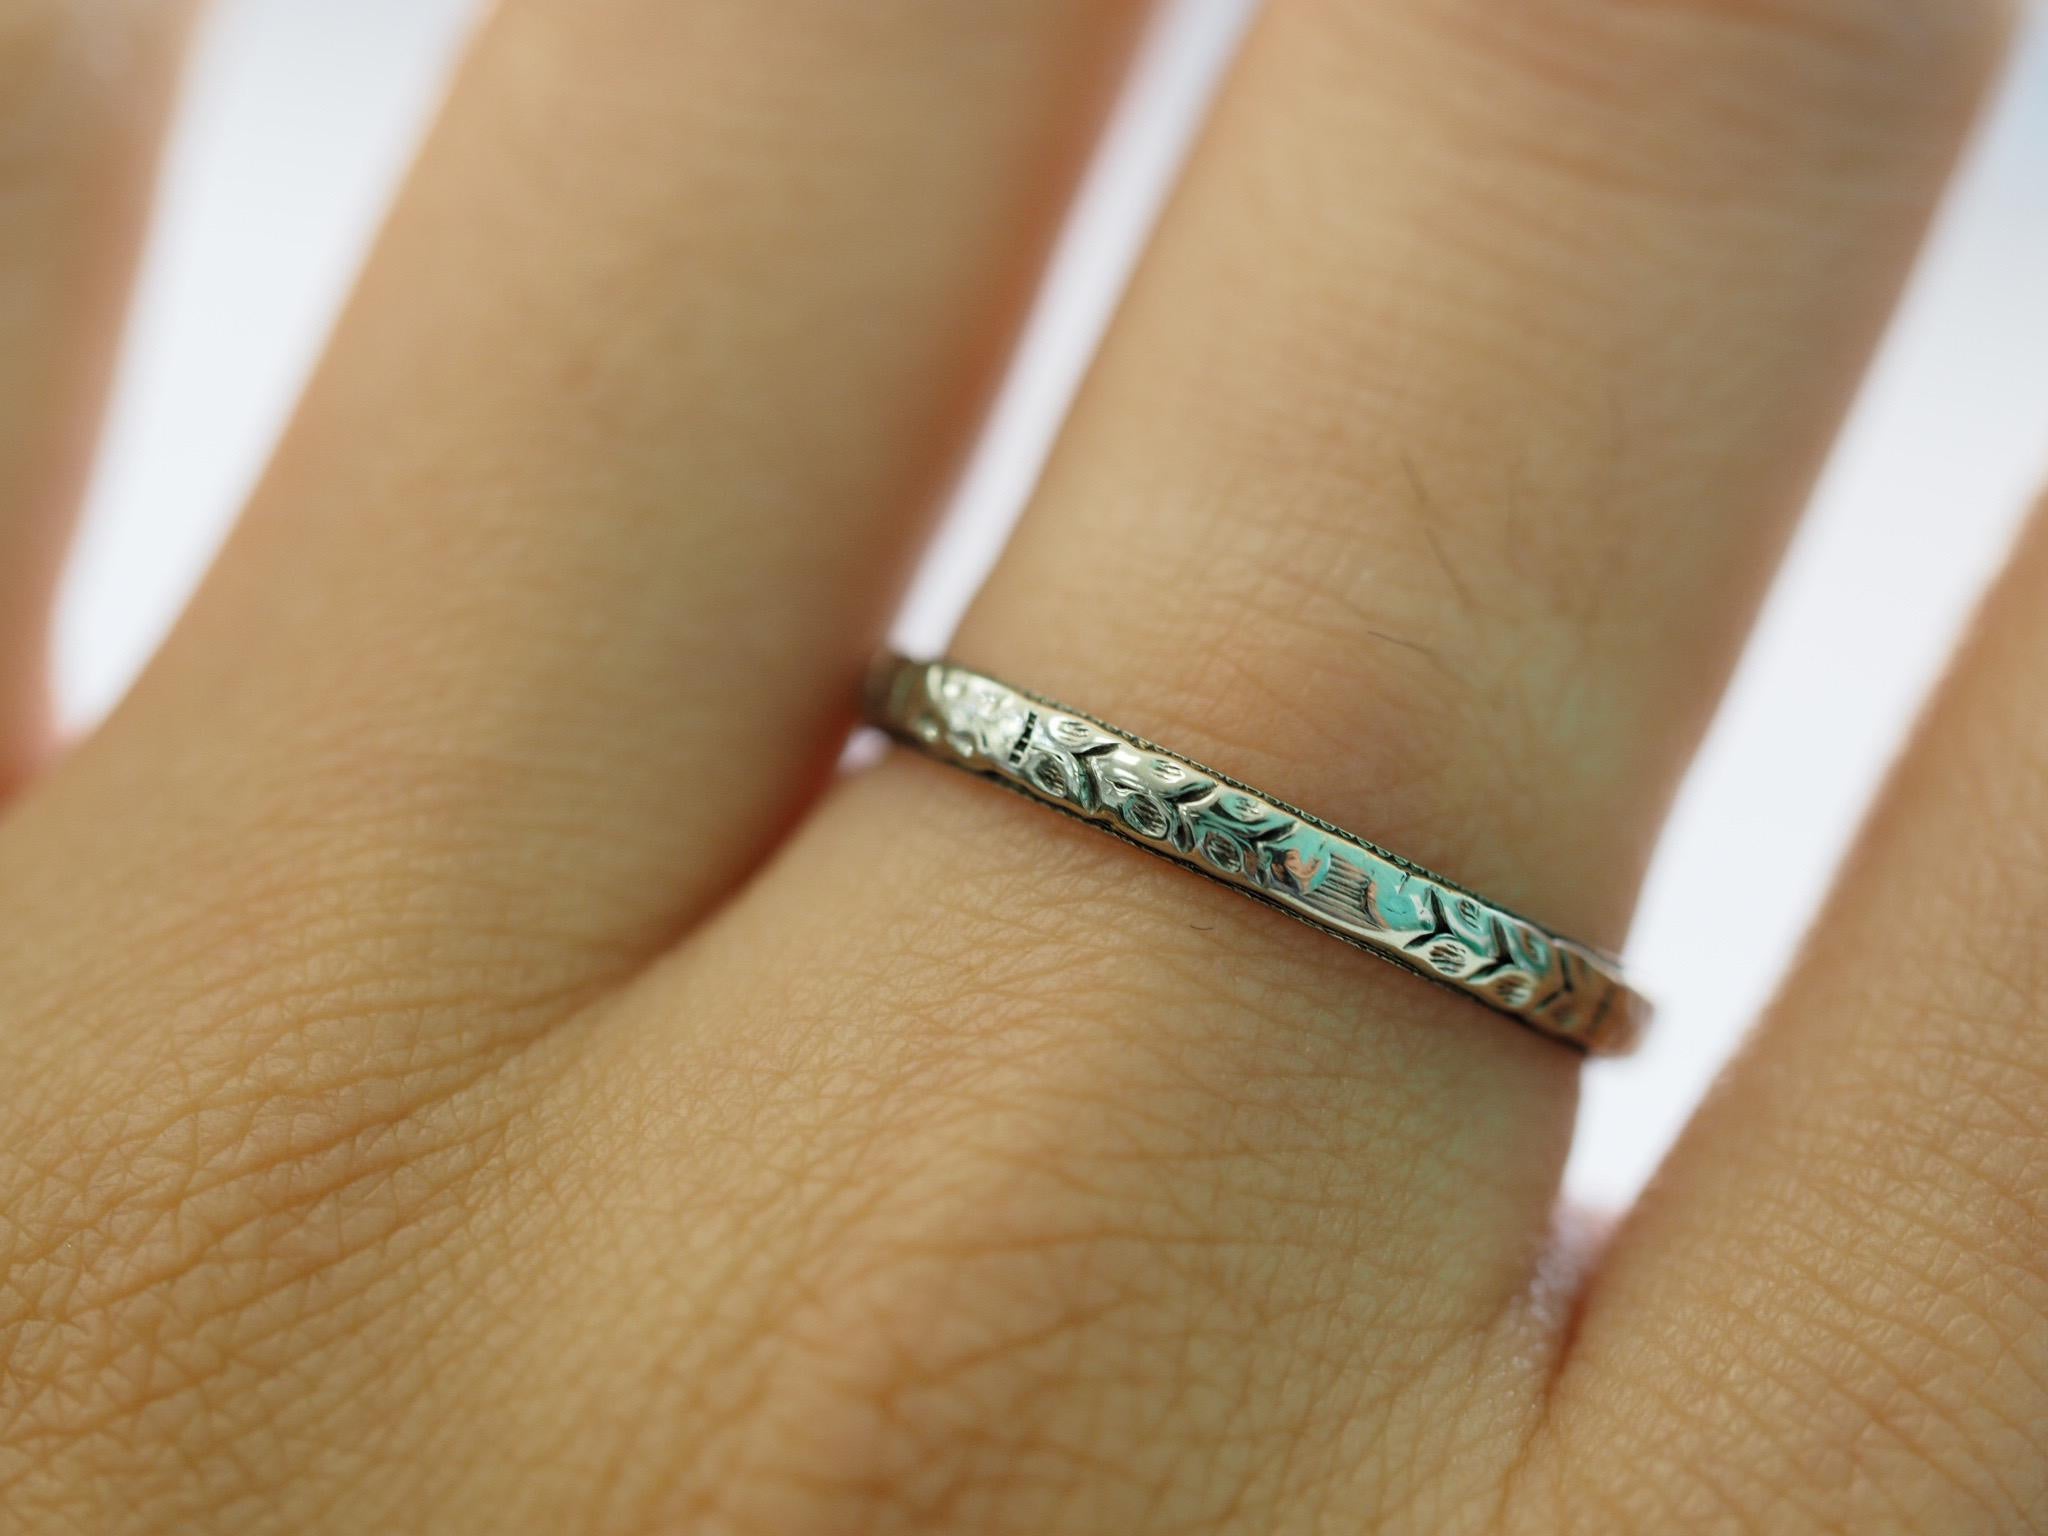 This Art Deco 18 Karat White Gold Band dates back to the 1920's.  It has beautiful engraving all the way around. 2 Grams. Size 7.5 can be sized upon request prior to shipping at no charge. 

Metal: 18K White Gold
Width: 2.34mm
Thickness: 1.24mm